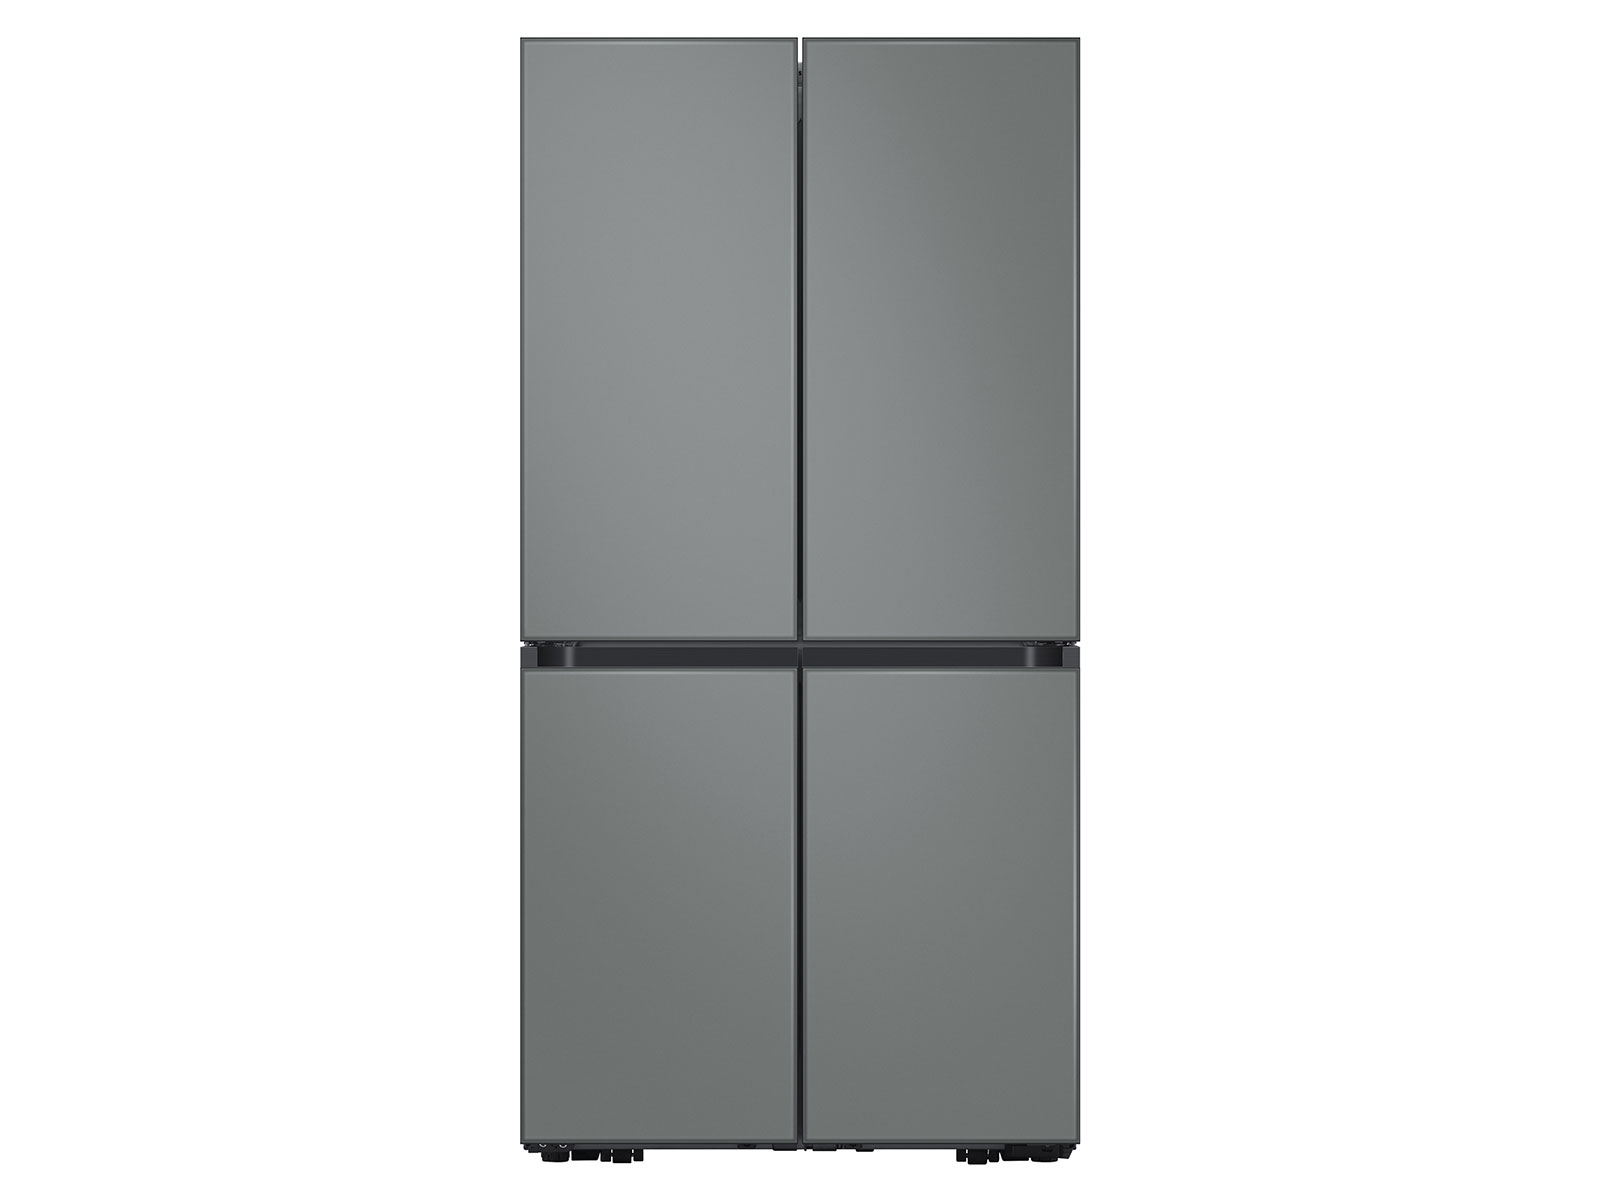 Samsung Bespoke refrigerators - Multiple style/colors available + $1 Samsung Complete Warranty $2599